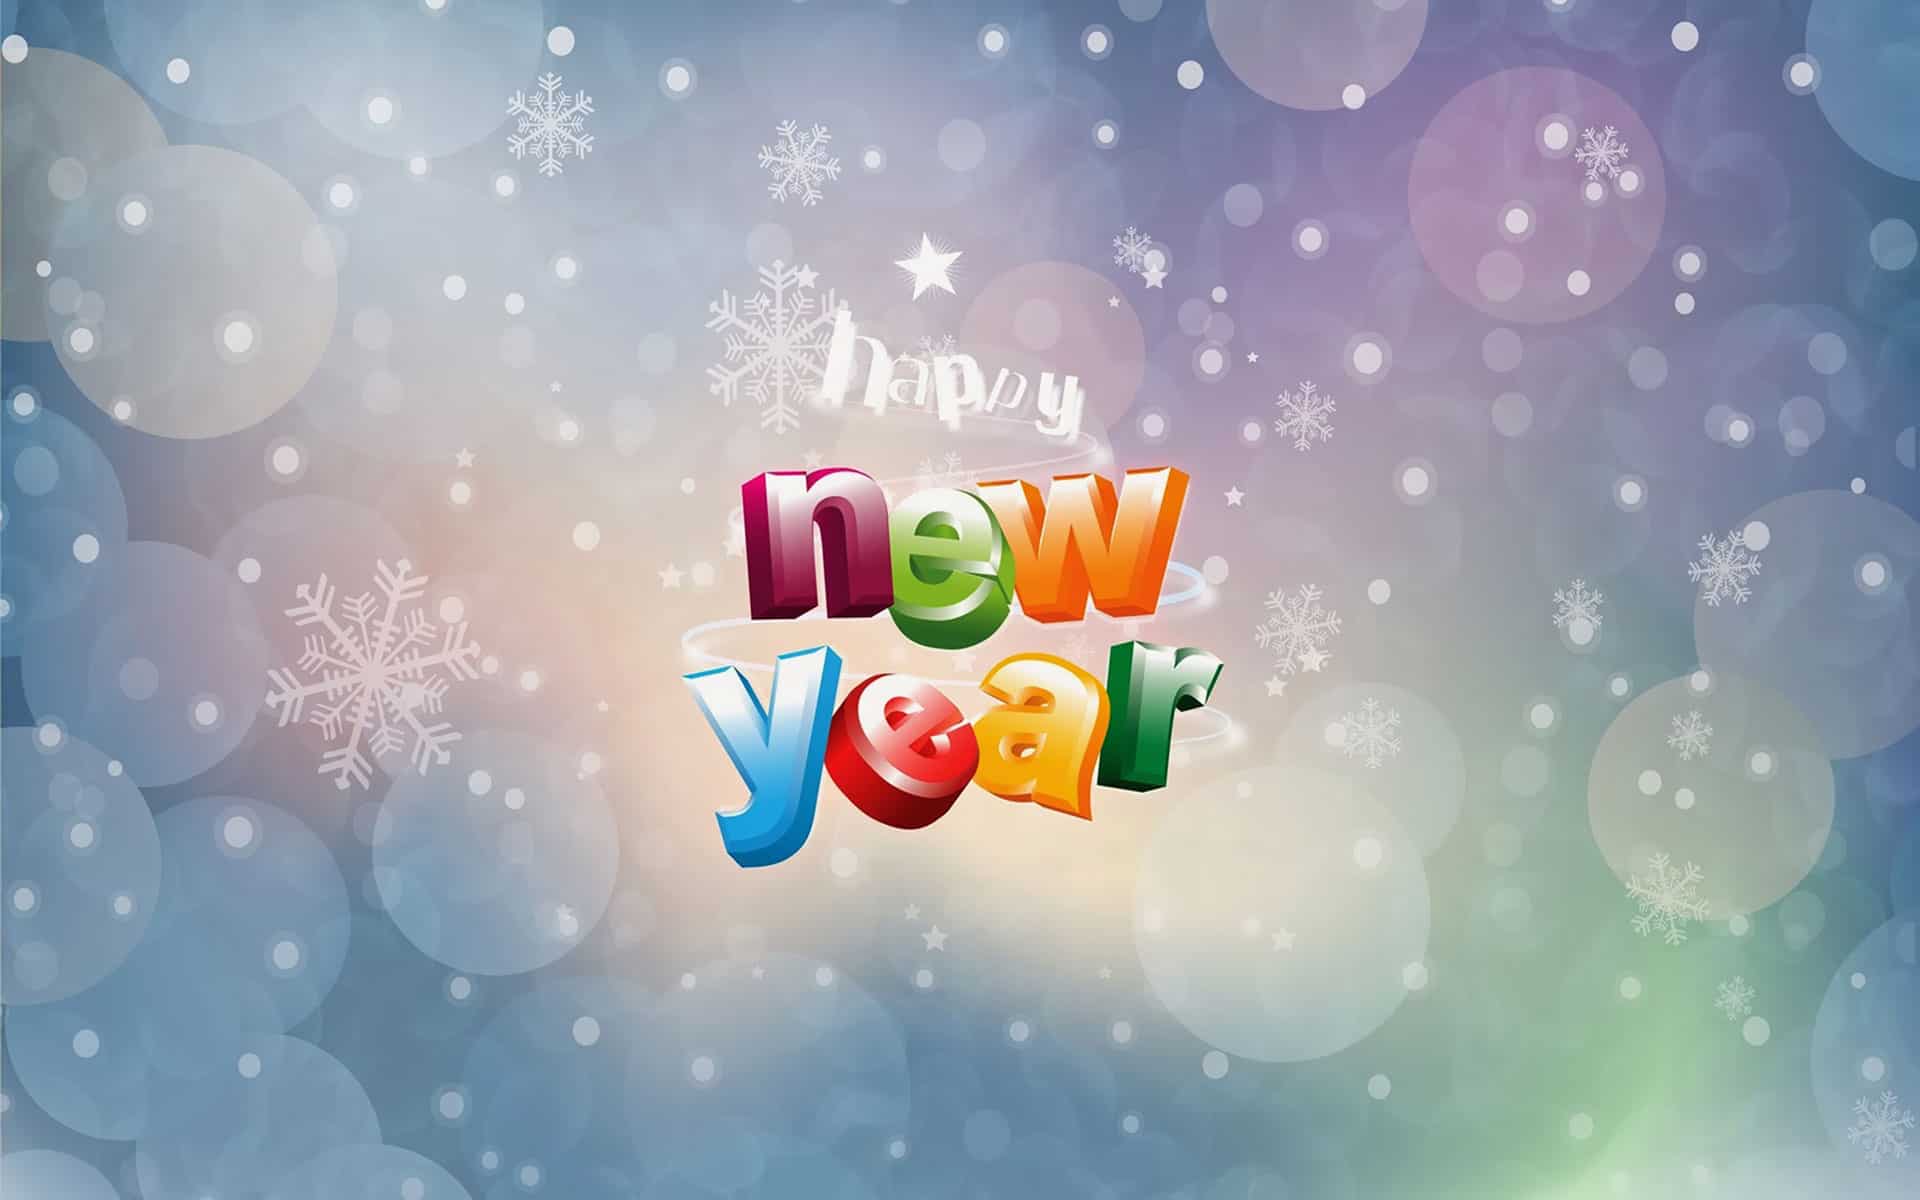 New Year 2018 Happy New Year Wallpapers